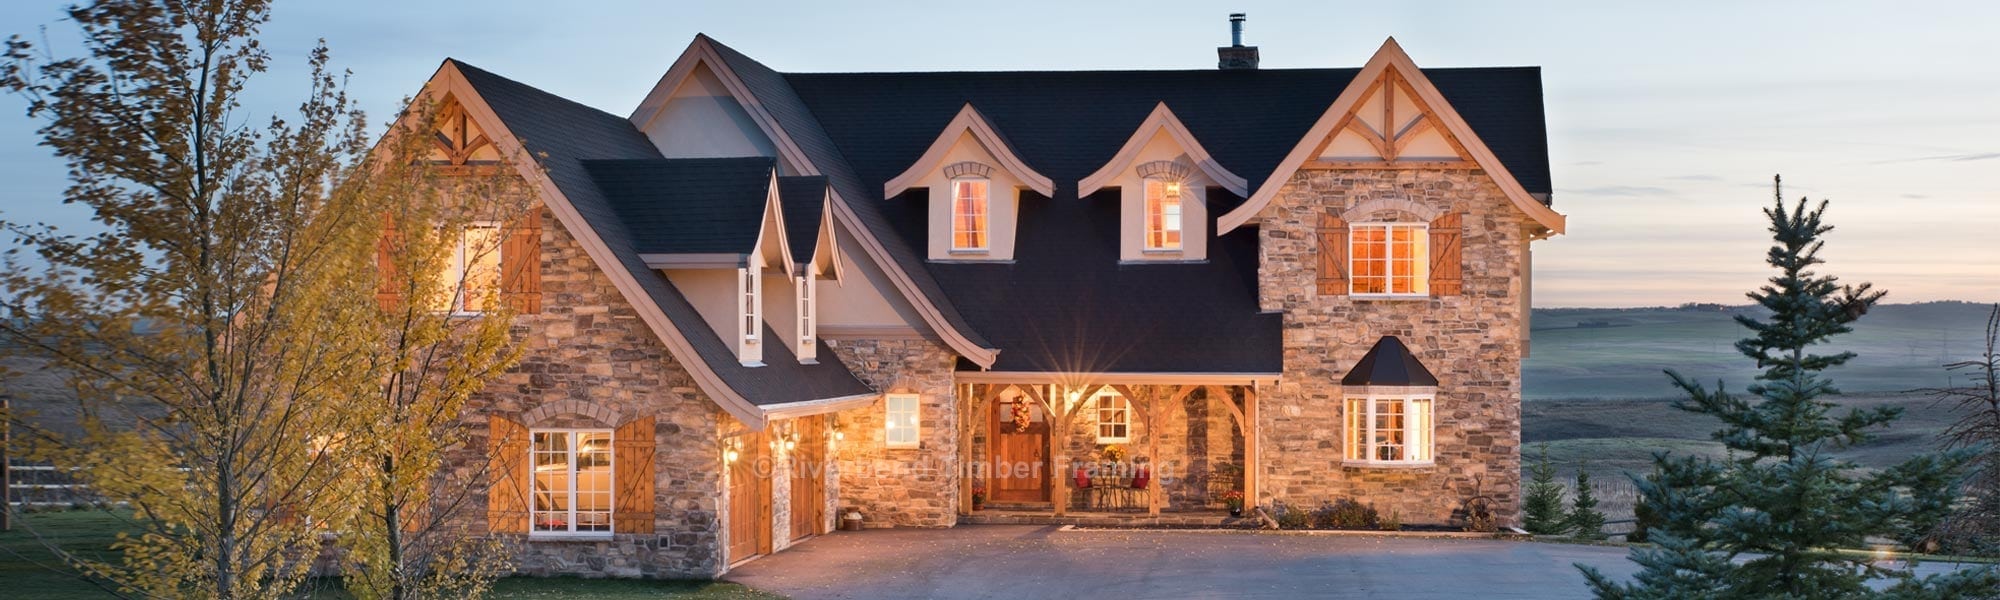 european style timber frame home